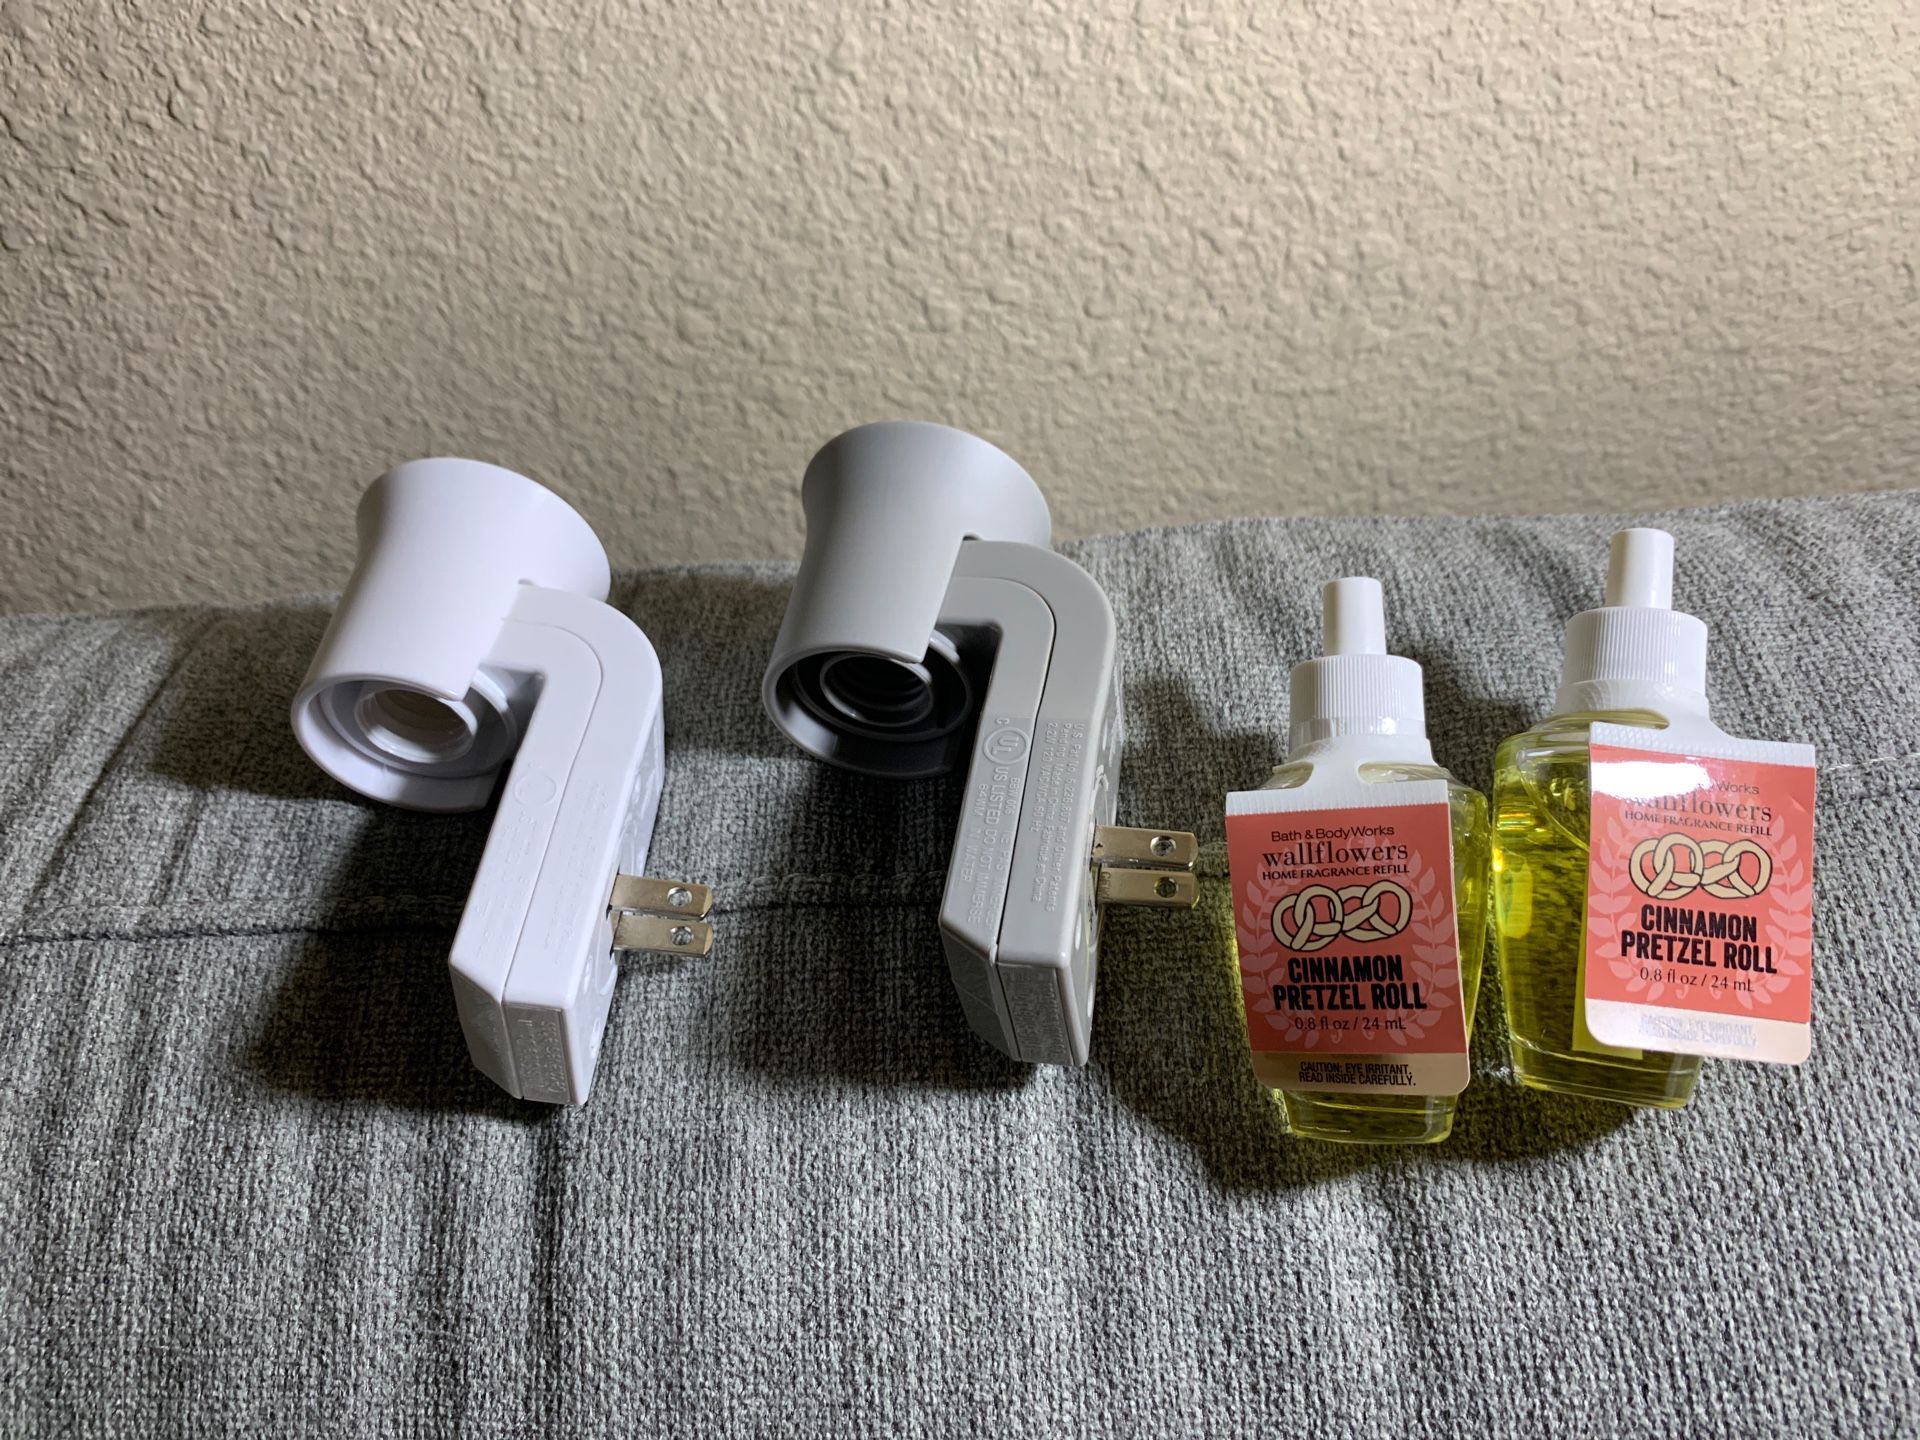 Bath and body works fragnance refills unopened and plugs